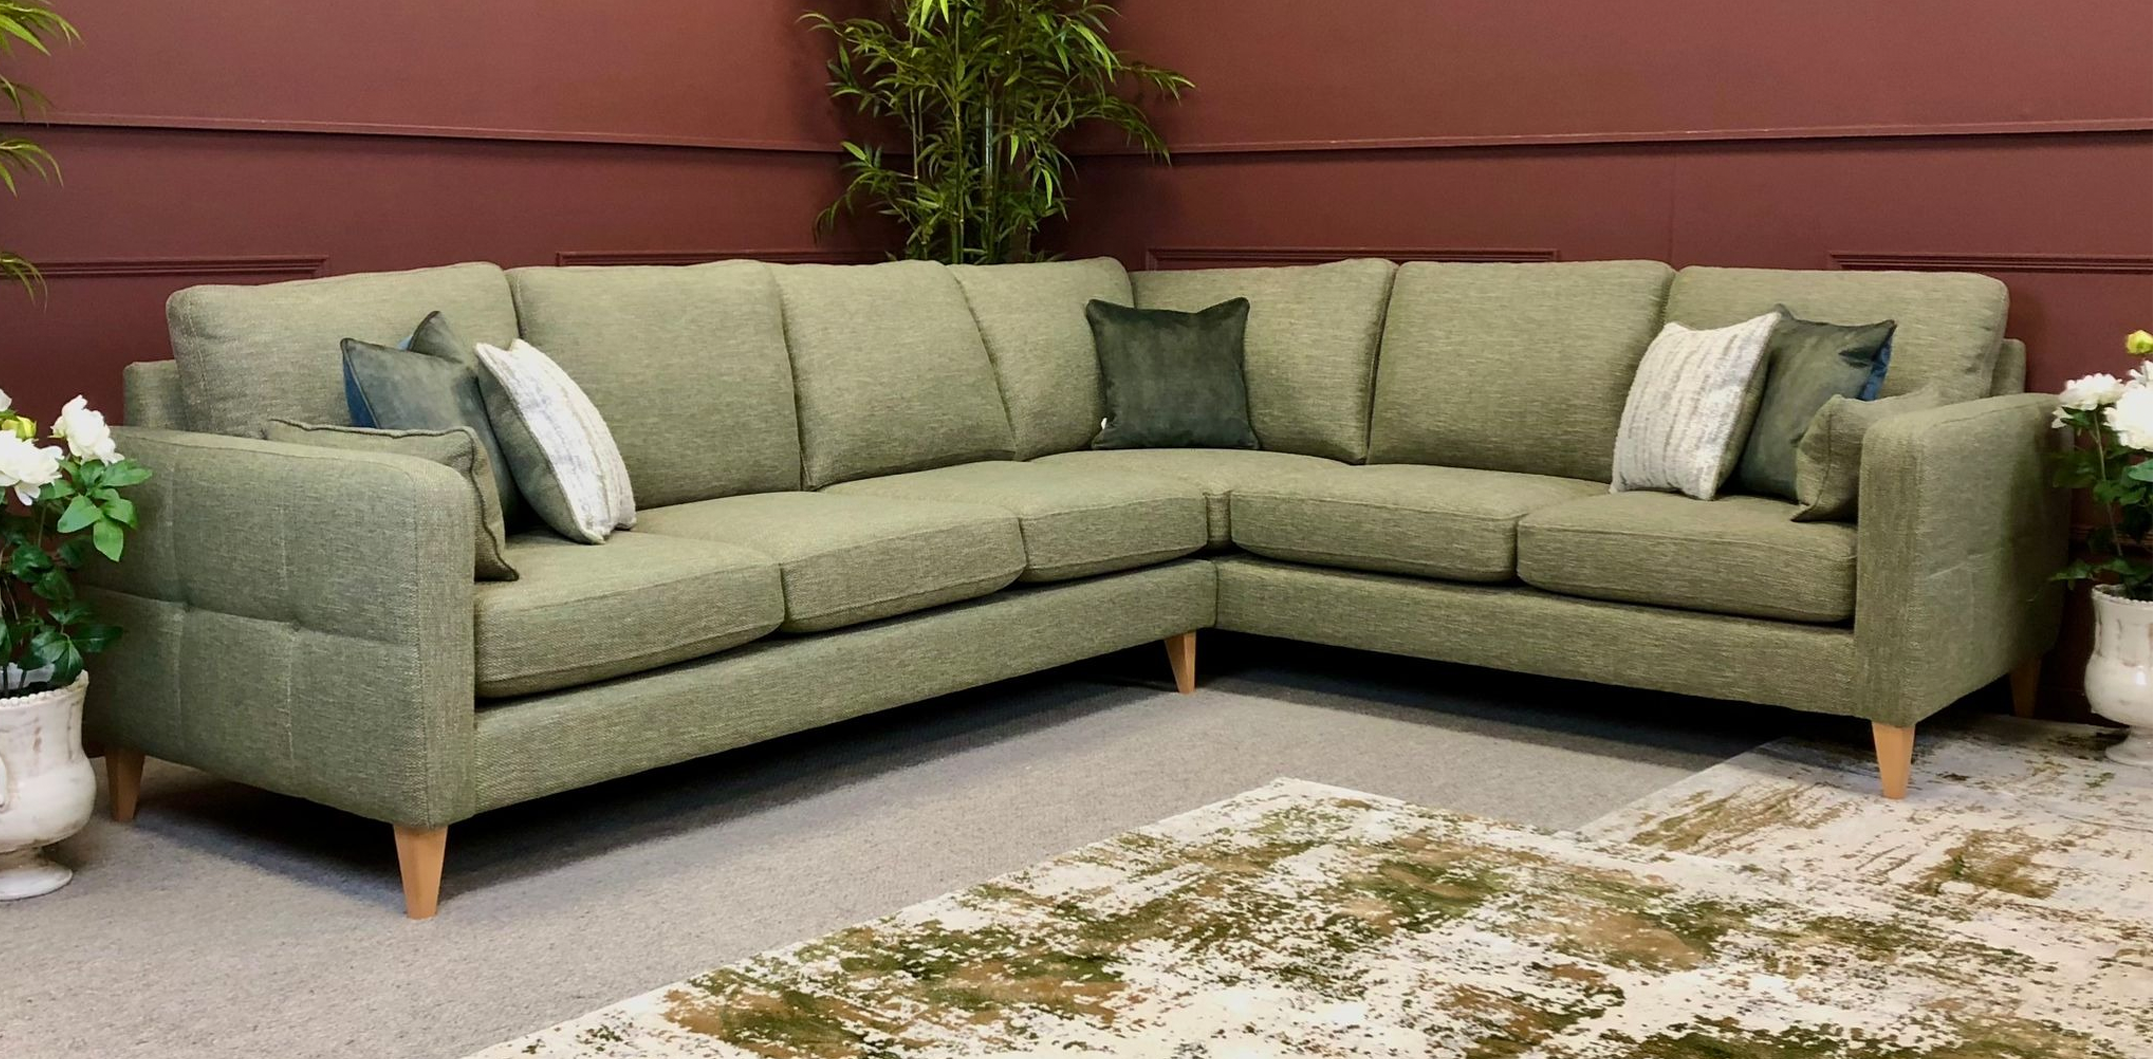 Our selection of sofas, sofa beds, couches, armchairs, recliners and corner sofas